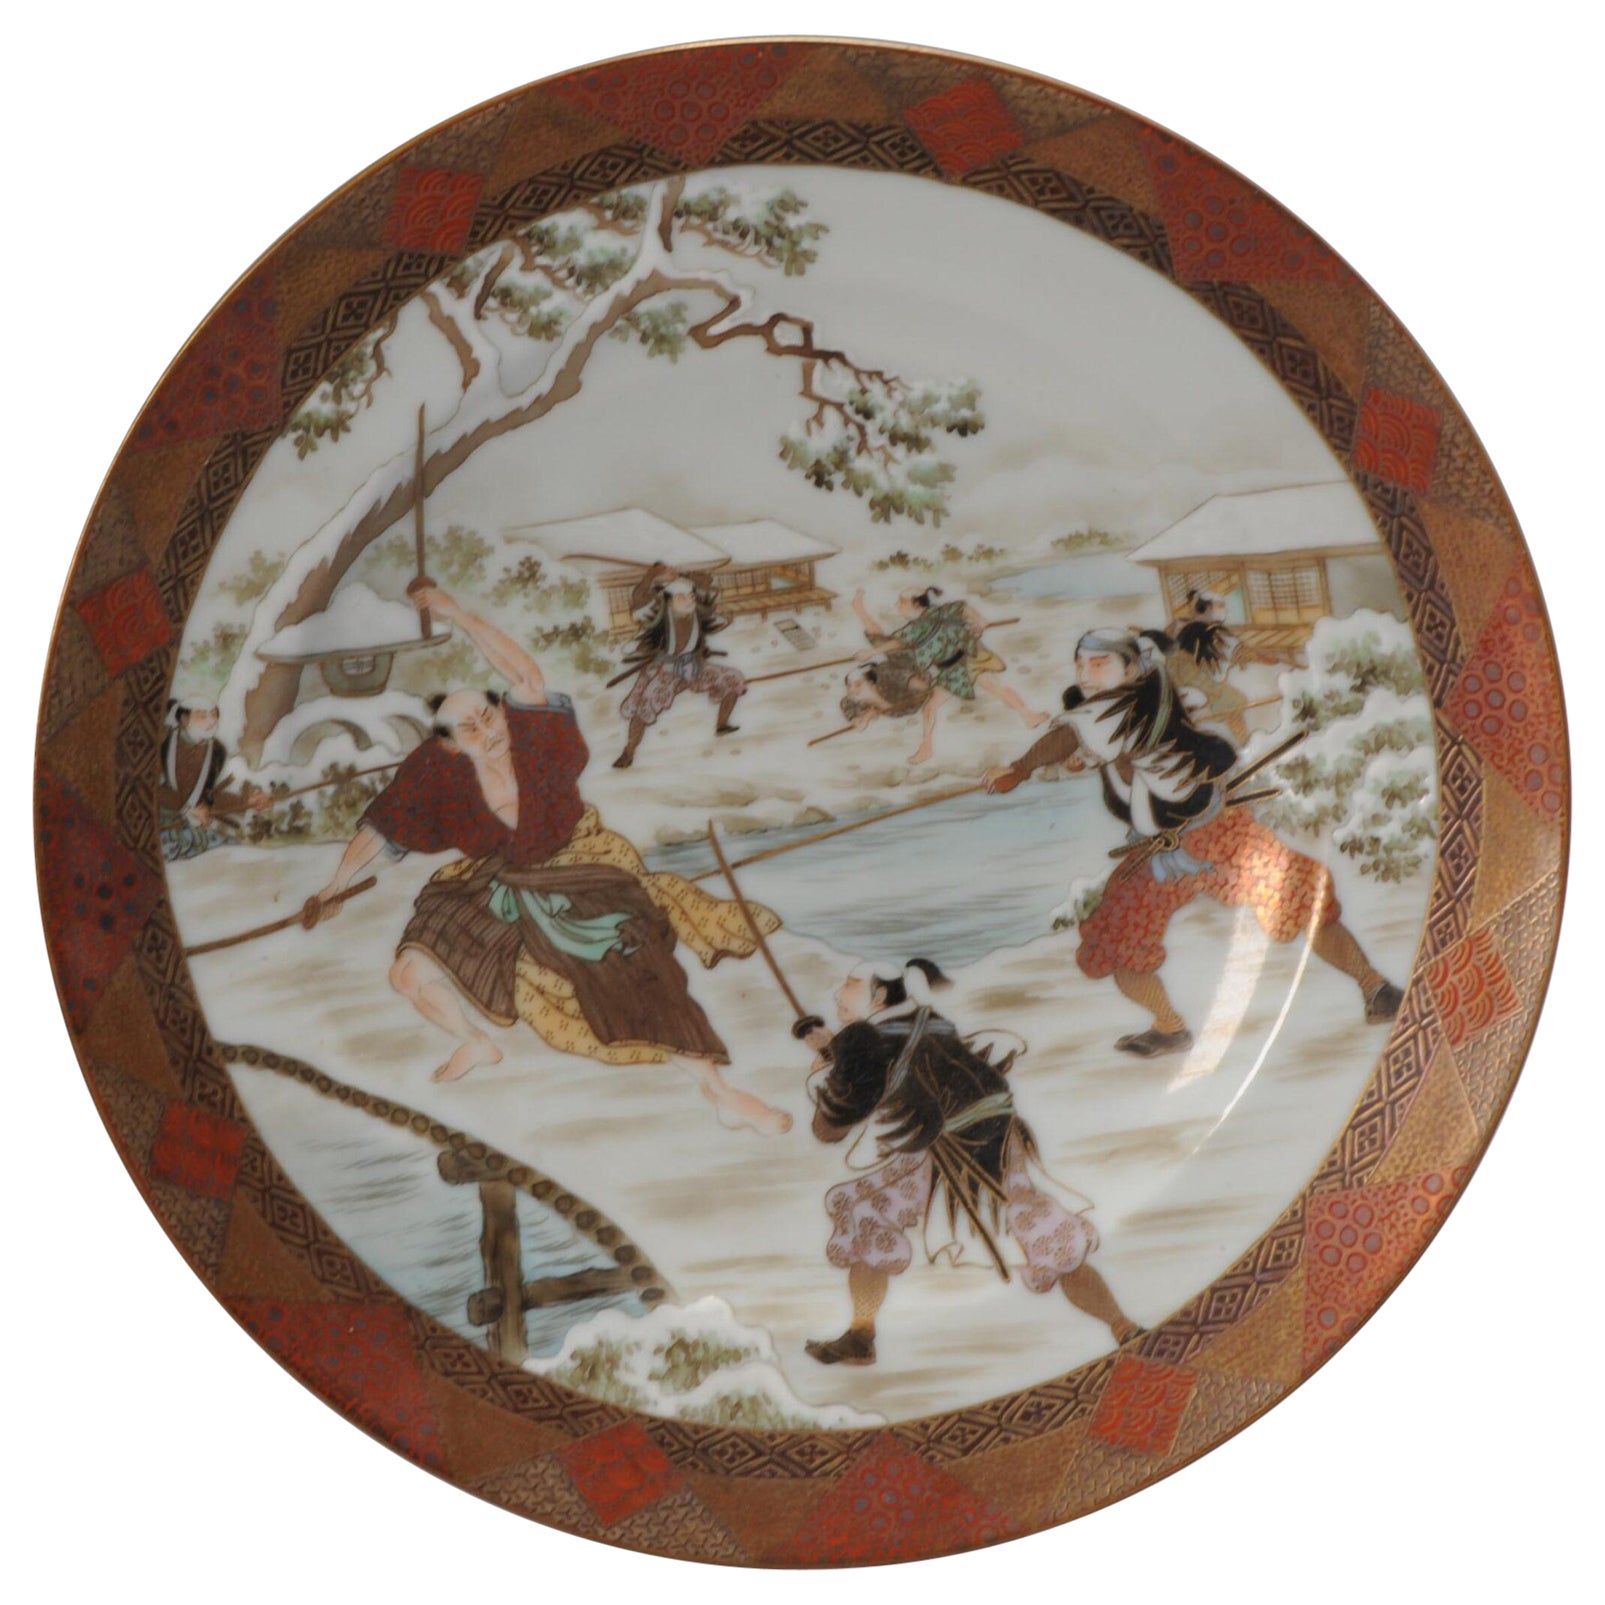 Antique Japanese Porcelain Dish with Warriors Top Quality Work Japan Marked Base